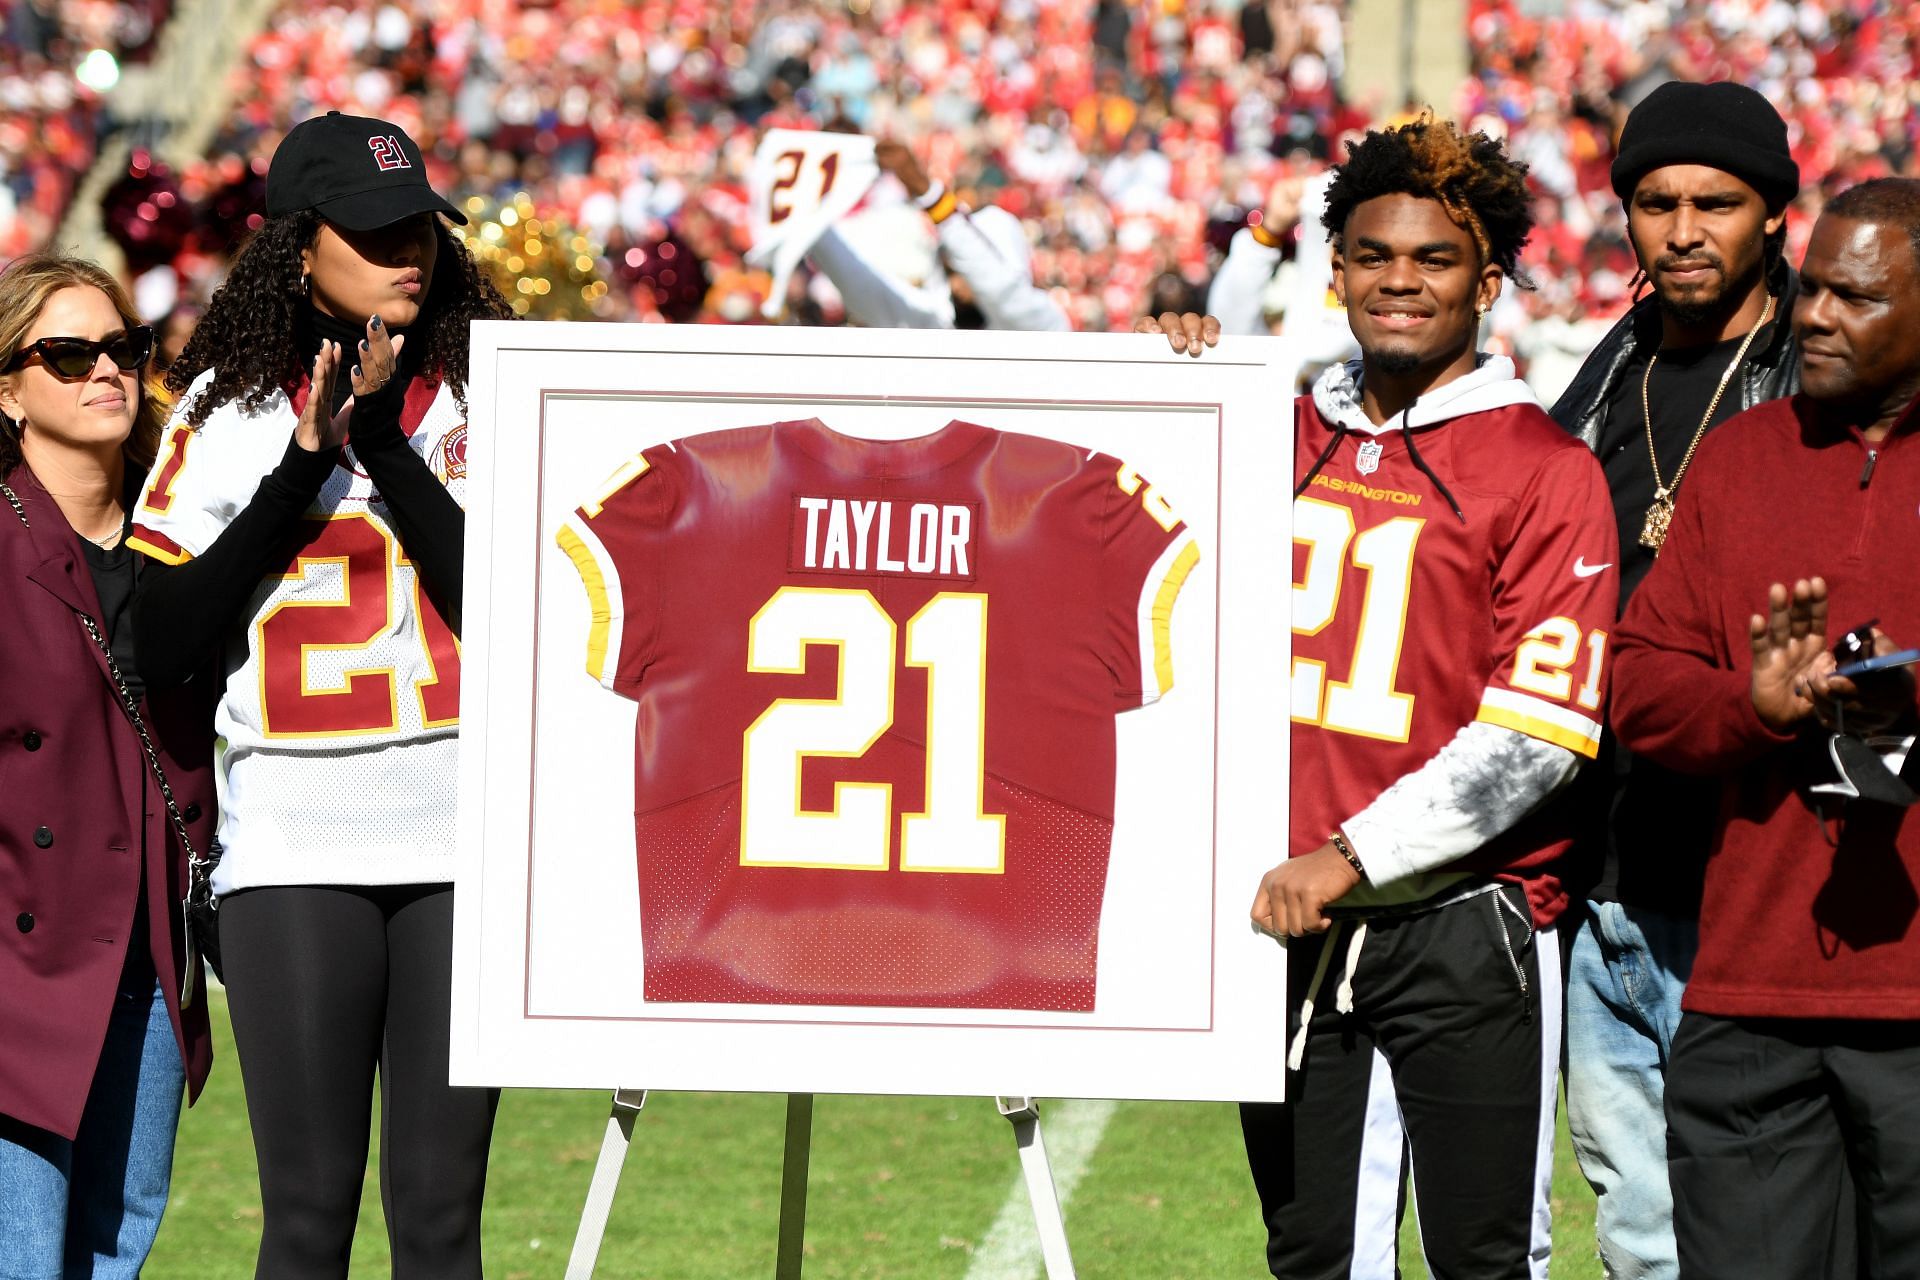 Family of the late WFT player Sean Taylor